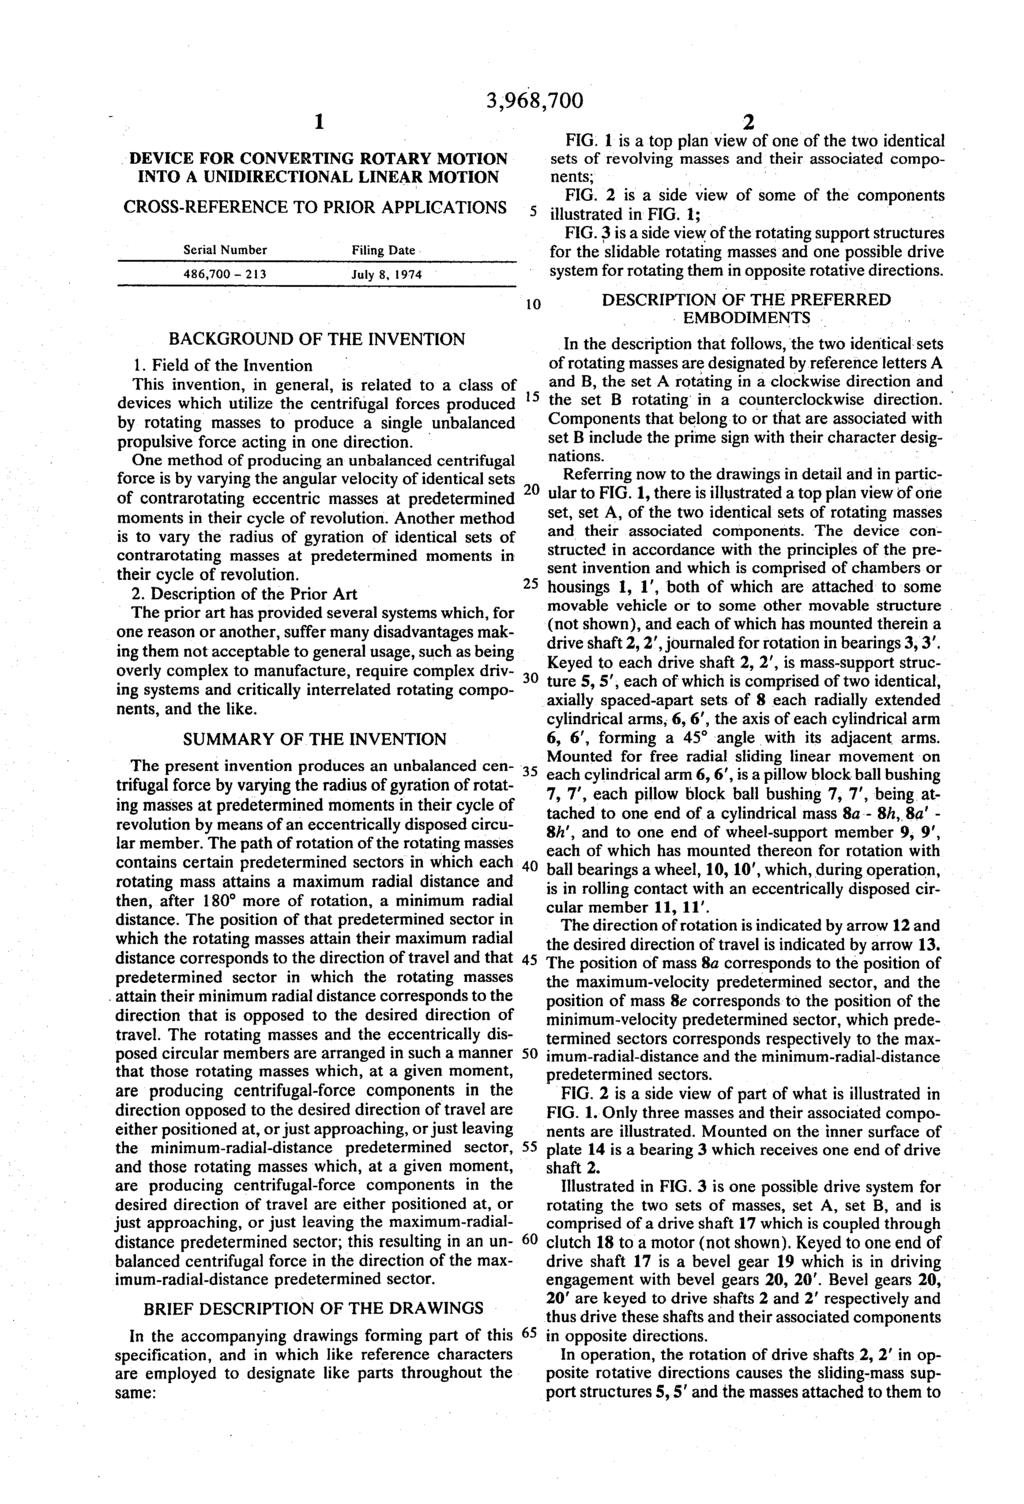 1. 3,968,700 DEVICE FOR CONVERTING ROTARY MOTION INTO A UNIDIRECTIONAL LINEAR MOTION CROSS-REFERENCE TO PRIOR APPLICATIONS 5 Serial Number 486,700-213 Filing Date, July 8, 1974 BACKGROUND OF THE